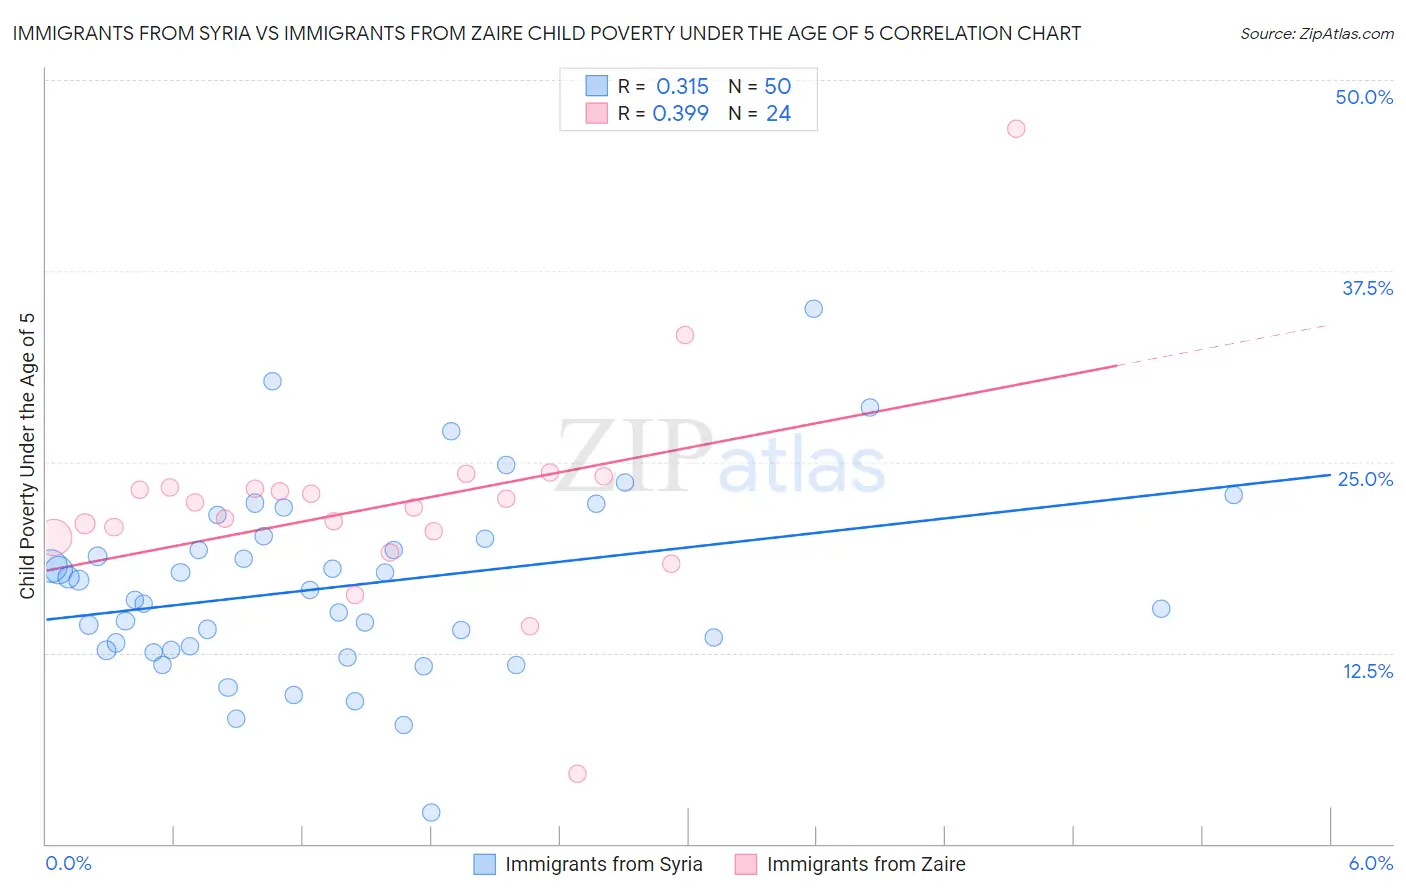 Immigrants from Syria vs Immigrants from Zaire Child Poverty Under the Age of 5